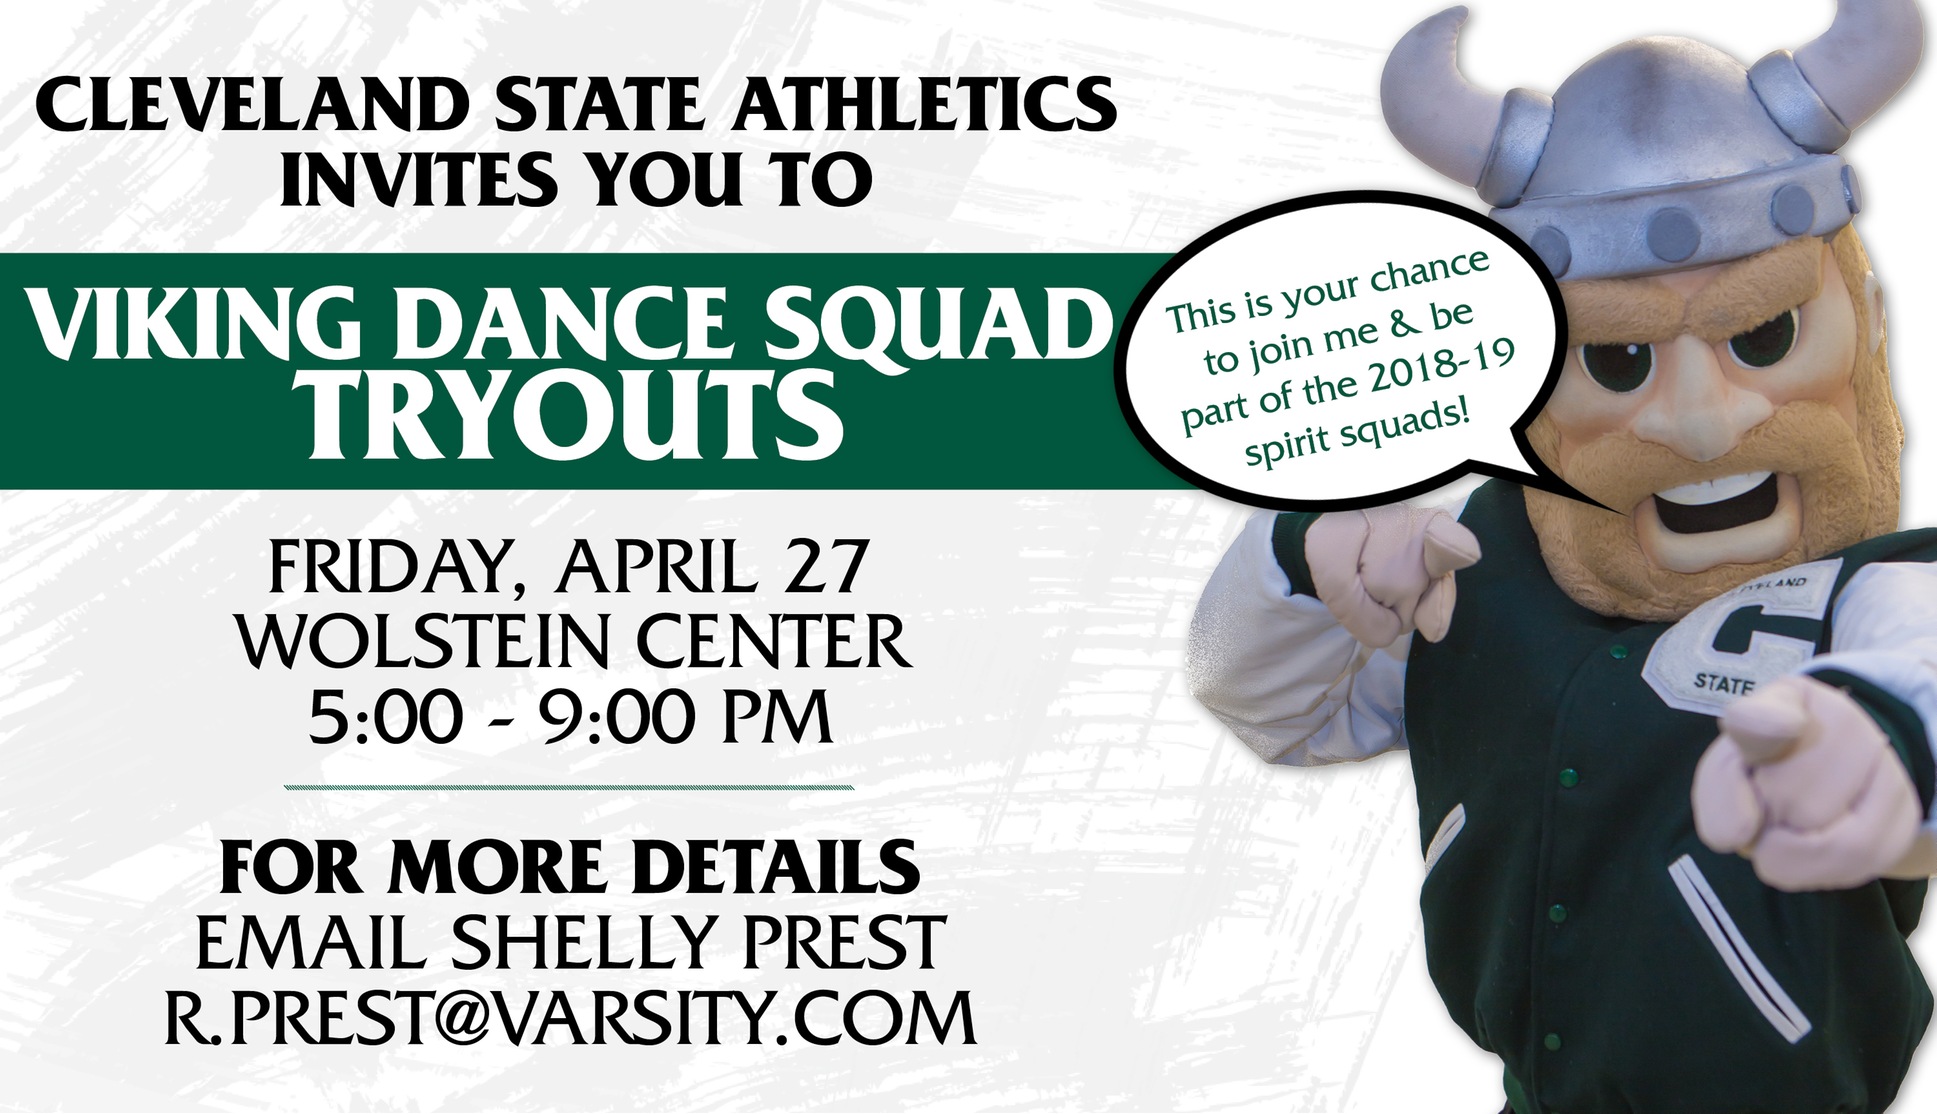 Cleveland State to Hold Viking Dance Squad Tryouts April 27